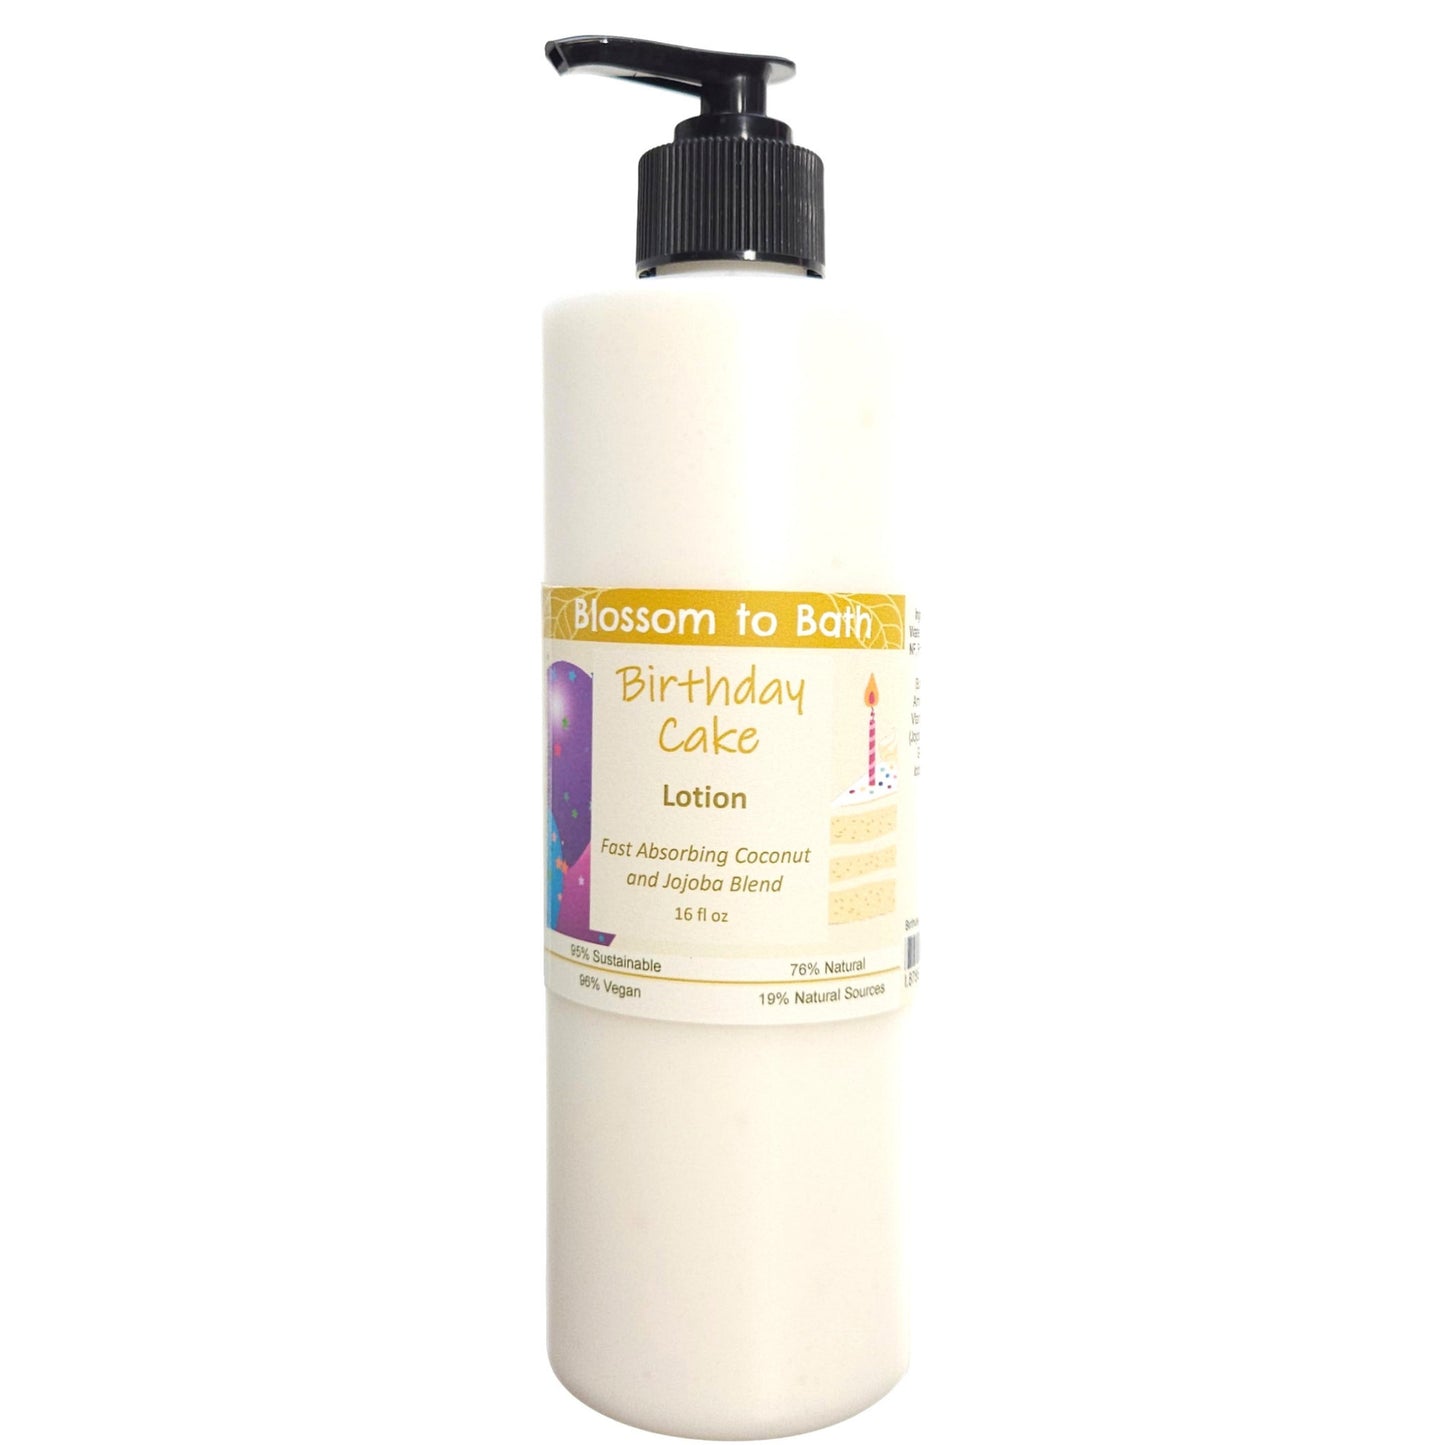 Buy Blossom to Bath Birthday Cake Lotion from Flowersong Soap Studio.  Daily moisture luxury that soaks in quickly made with organic oils and butters that soften and smooth the skin  The essence of a vanilla buttercream frosted birthday cake.